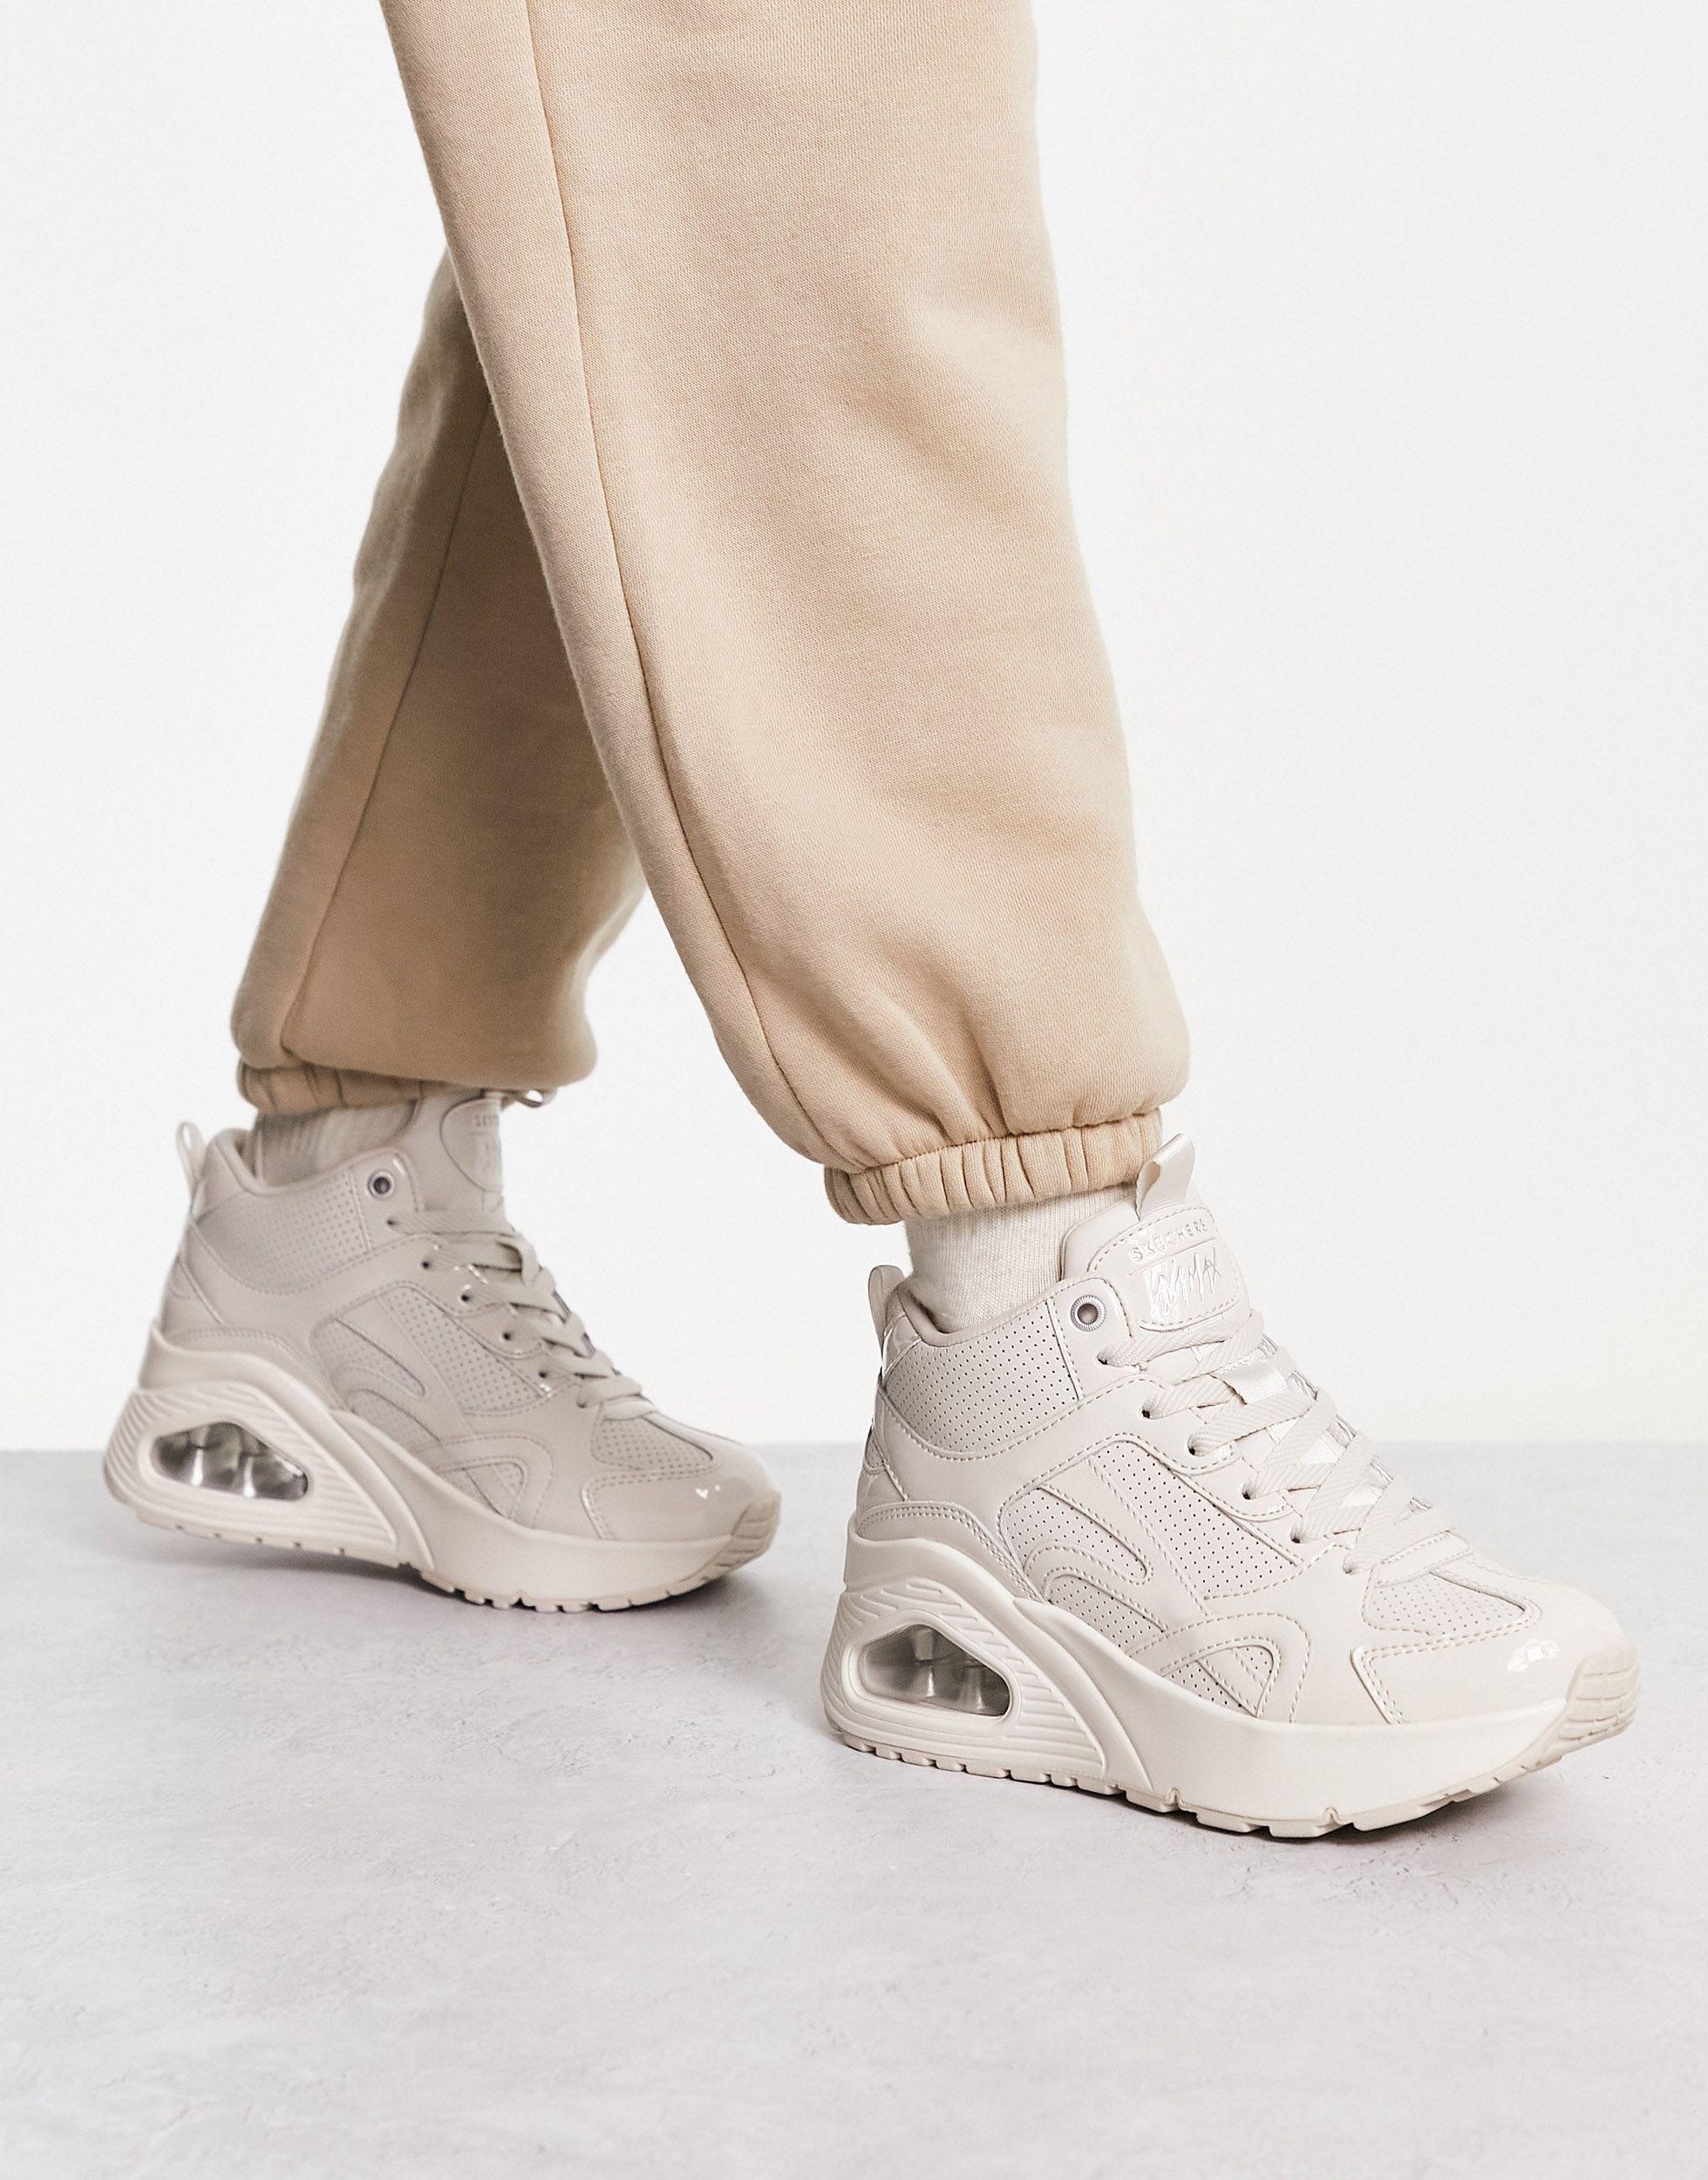 Skechers Uno Hi Ava Max Chunky Sneakers in Natural | Lyst